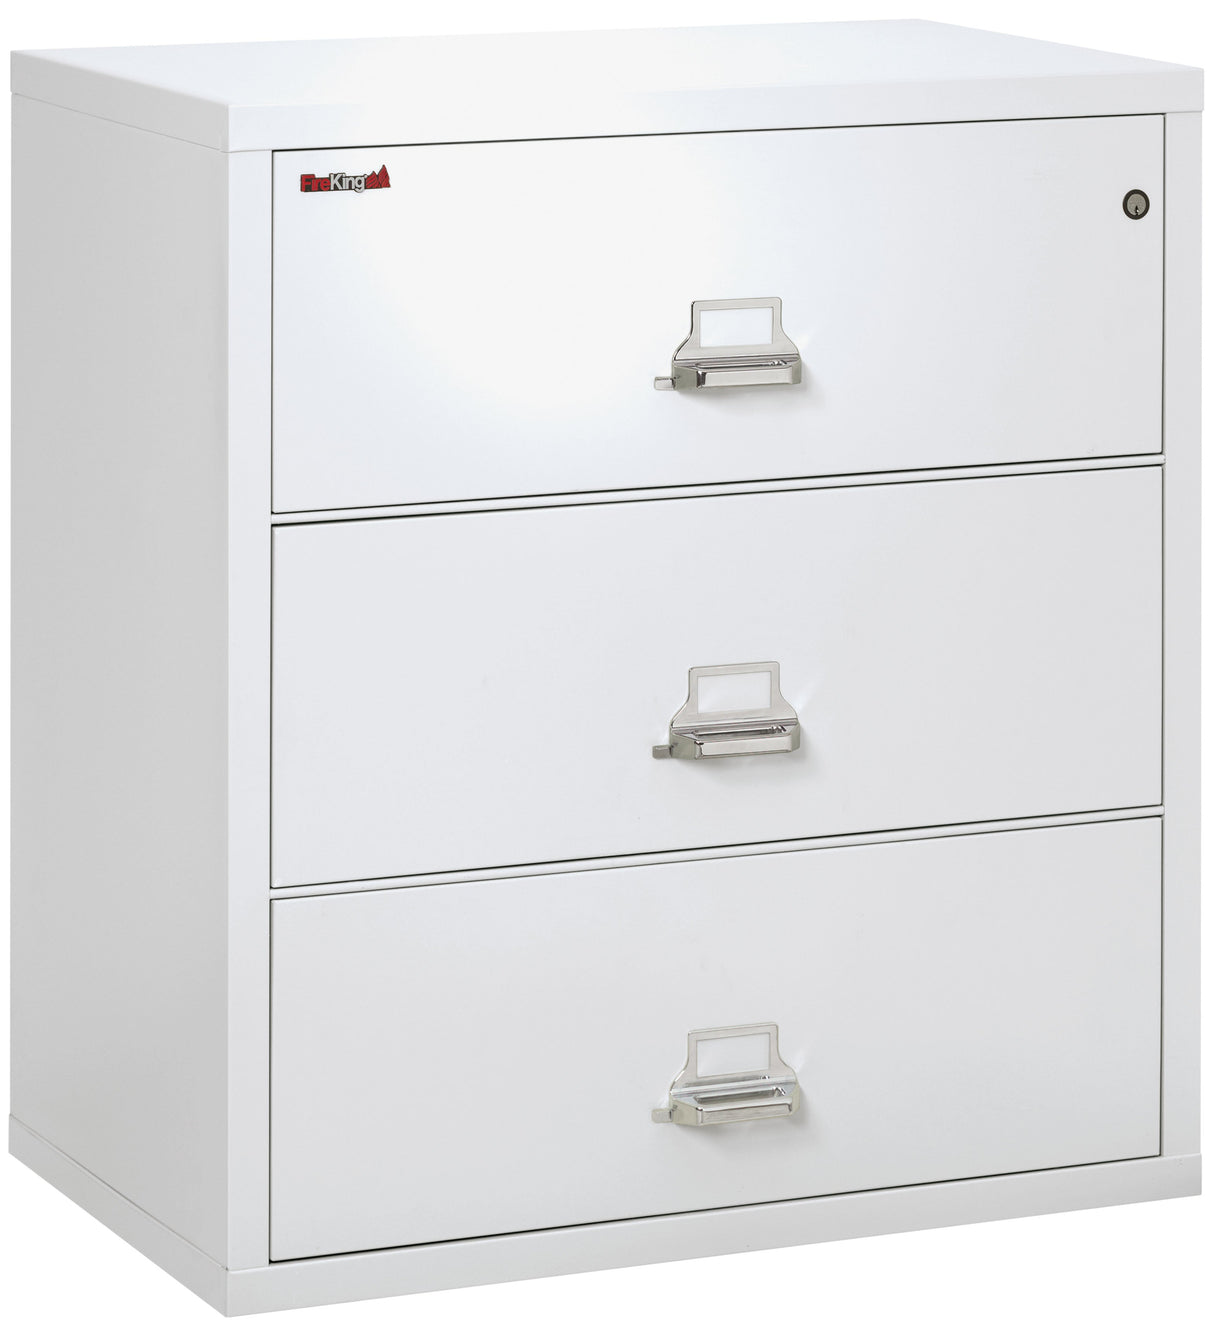 FireKing Classic Lateral File Cabinet (1-Hour Fire-Rated & High Security)